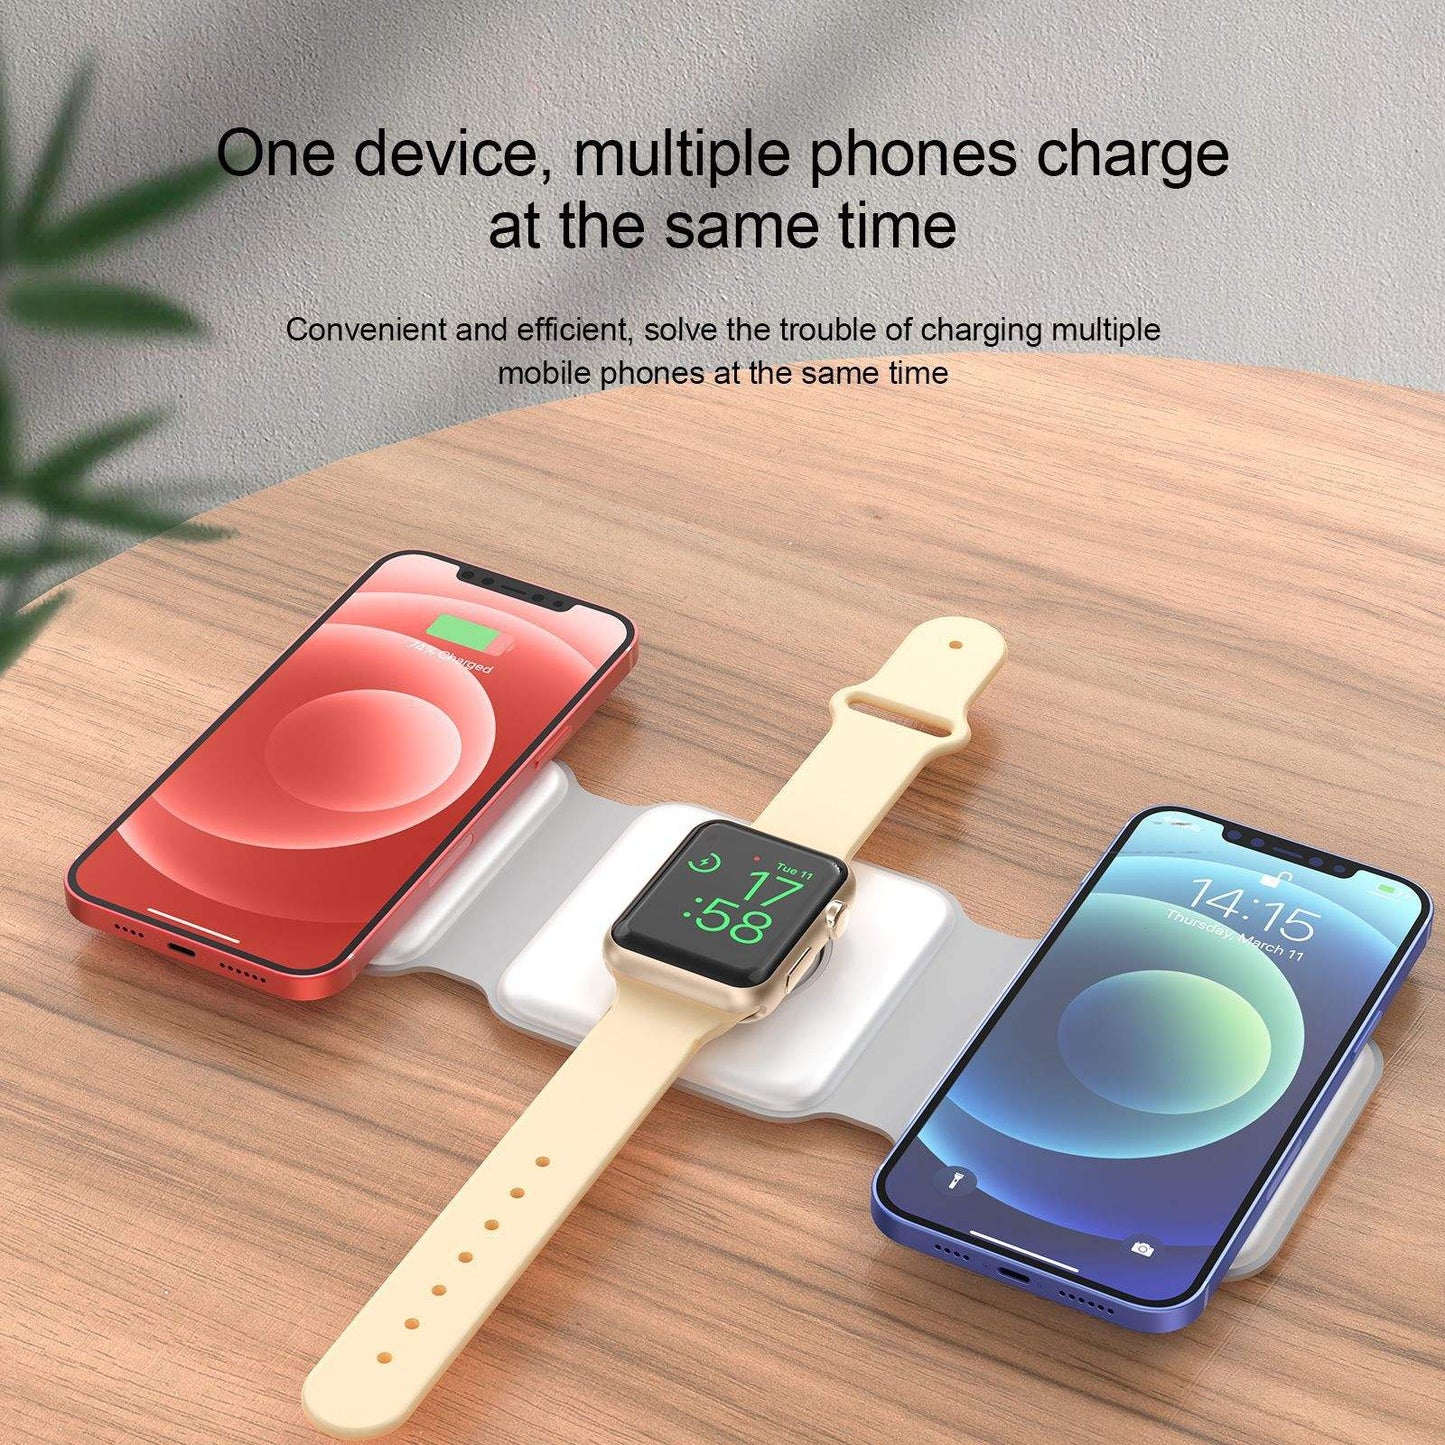 Magsafe15W Fast Charging Wireless Charging Three-In-One Folding Magnetic Wireless Charger For Apple Headset Watch - CLASSY CLOSET BOUTIQUEMagsafe15W Fast Charging Wireless Charging Three-In-One Folding Magnetic Wireless Charger For Apple Headset Watcheperlo2458A77A4C3B47C0A4324EFF3F9721A42458A77A4C3B47C0A4324EFF3F9721A43 in 1 Black Night Light